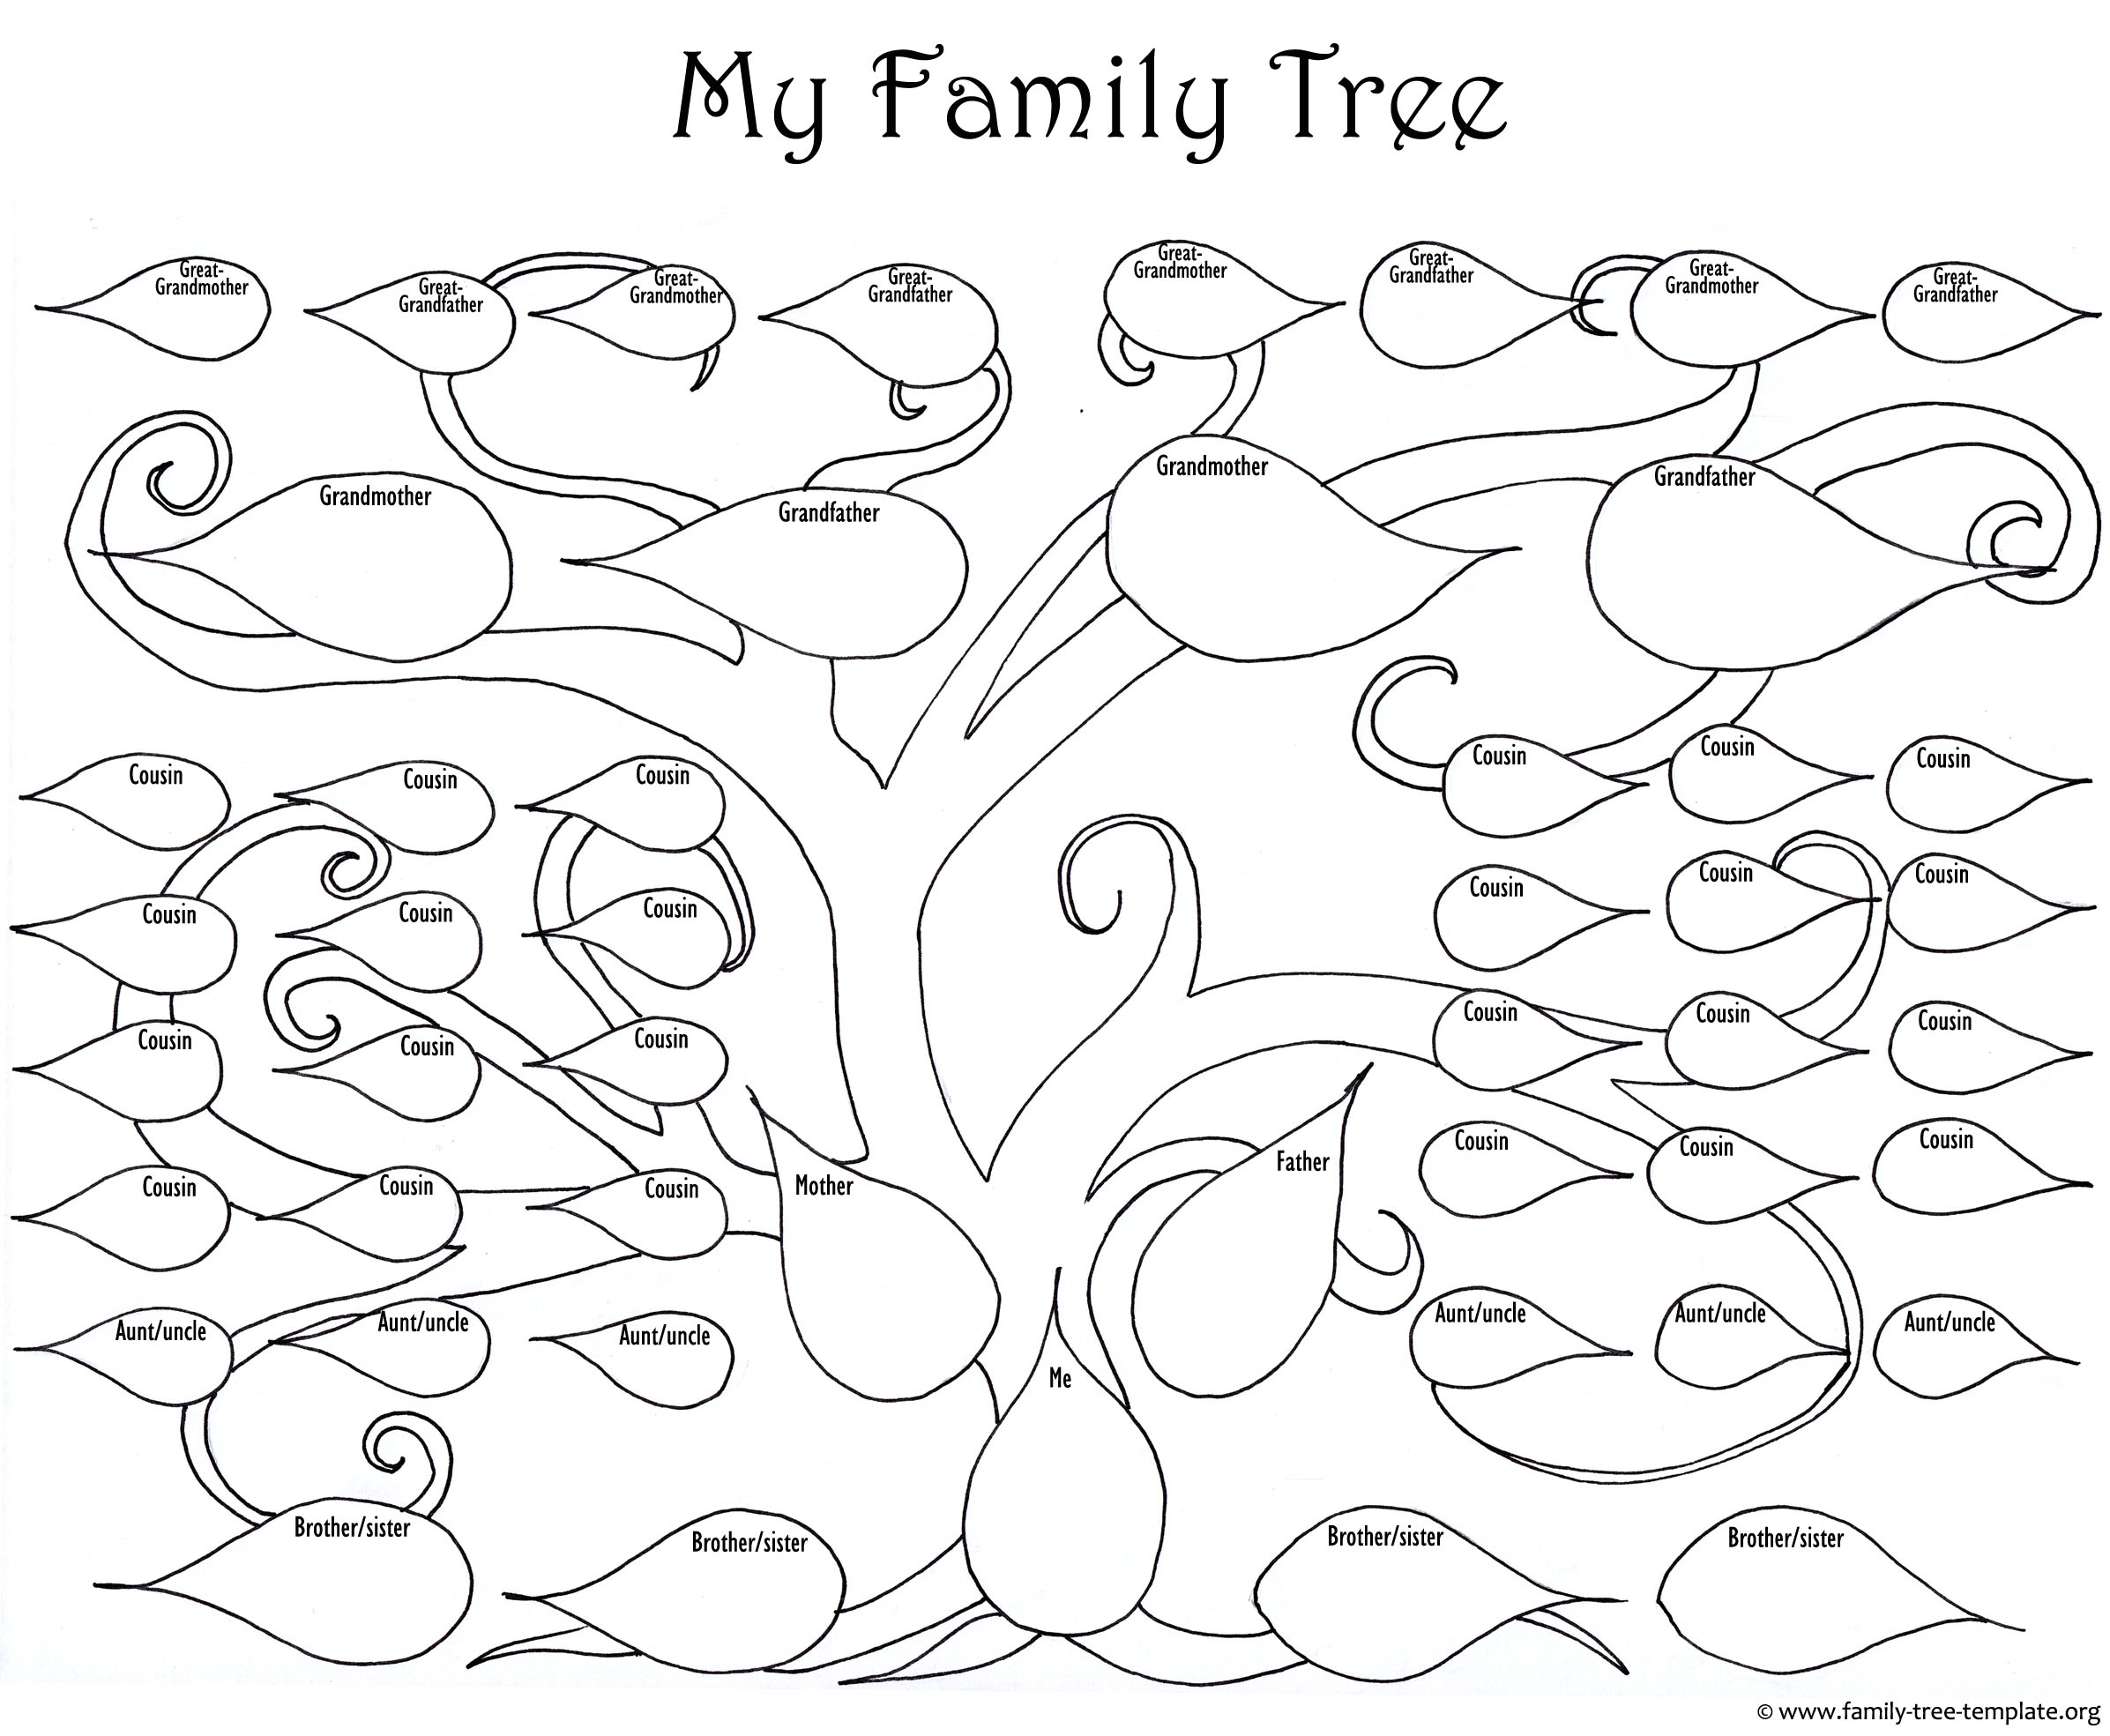 A Printable Blank Family Tree to Make Your Kids Genealogy Chart